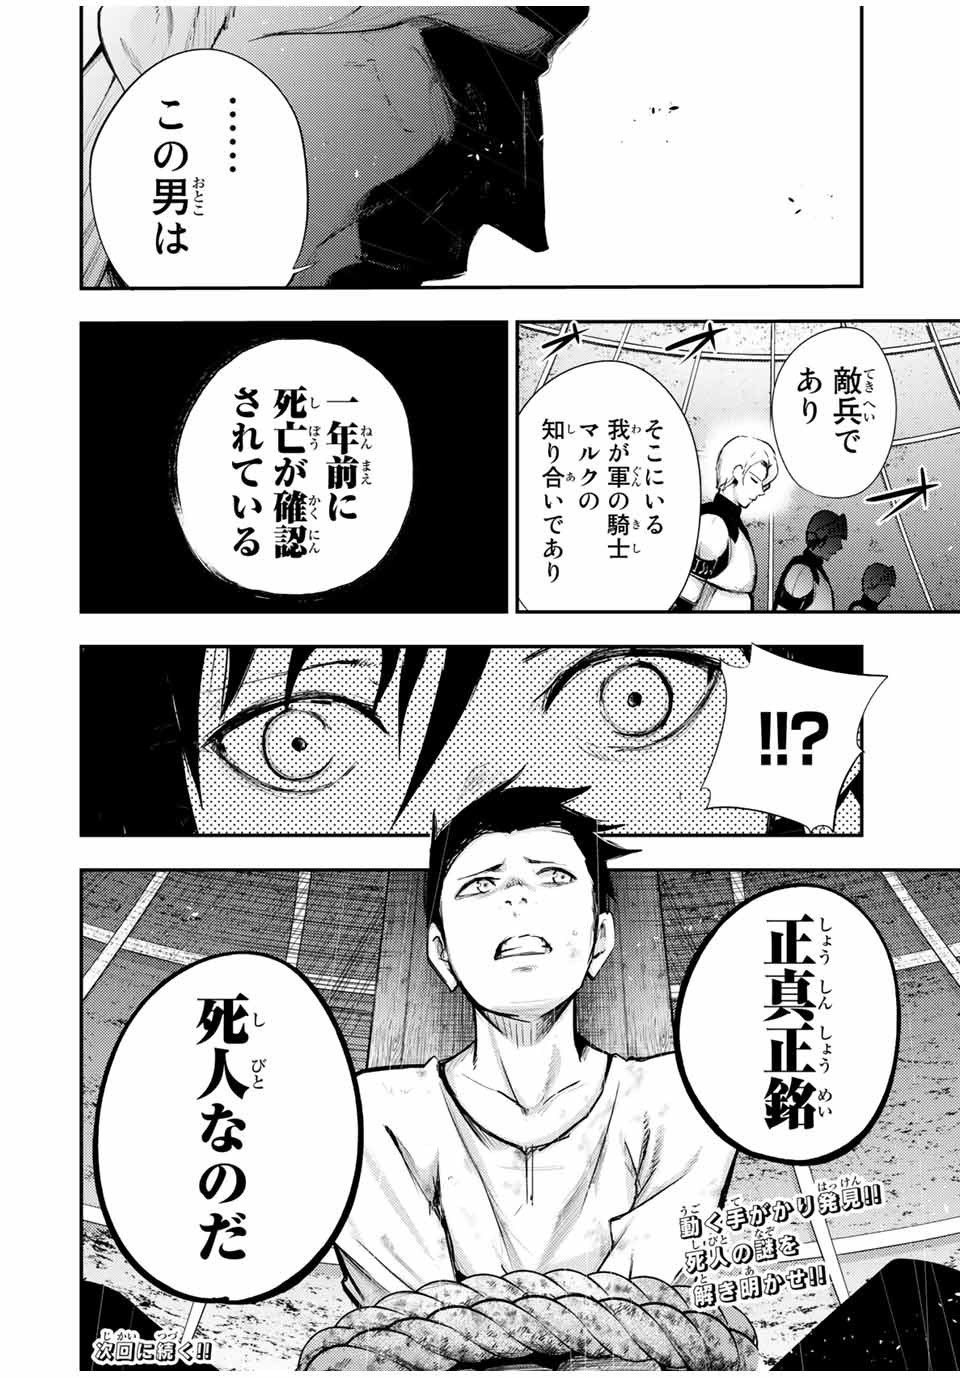 the strongest former prince-; 奴隷転生 ～その奴隷、最強の元王子につき～ 第27話 - Page 20